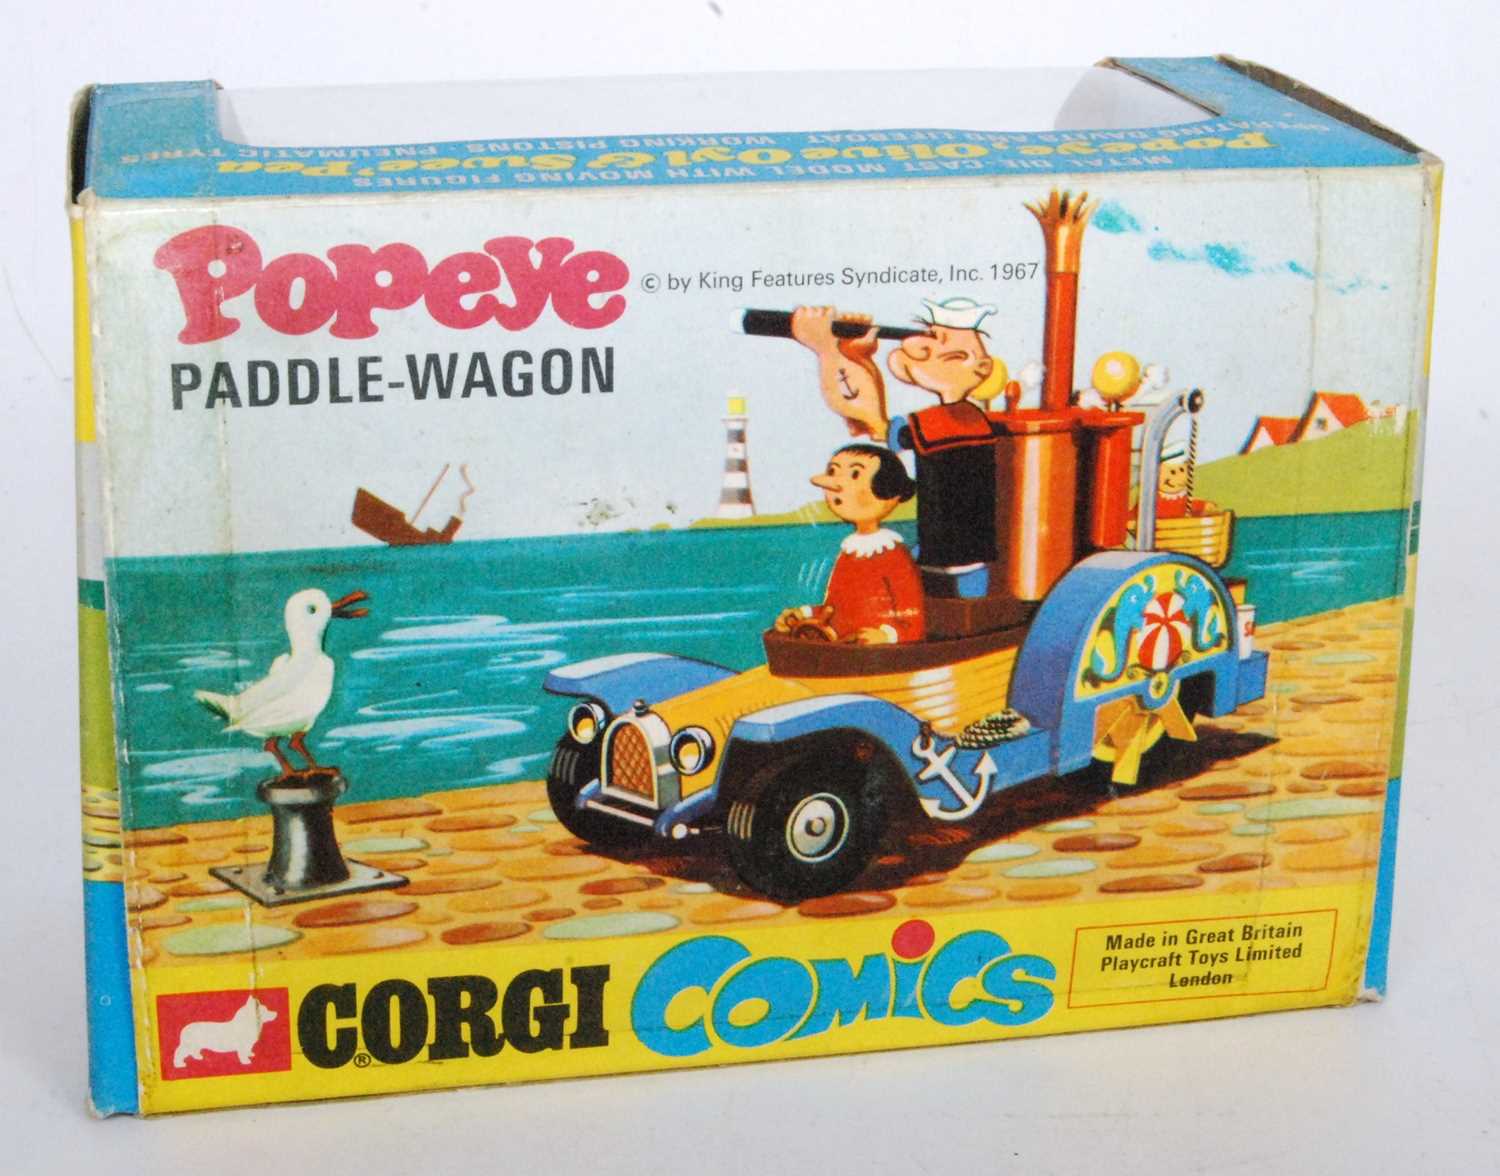 A Corgi Toys No. 802 Popeye's Paddle Wagon, finished in yellow with red chassis, white upper body - Image 3 of 3